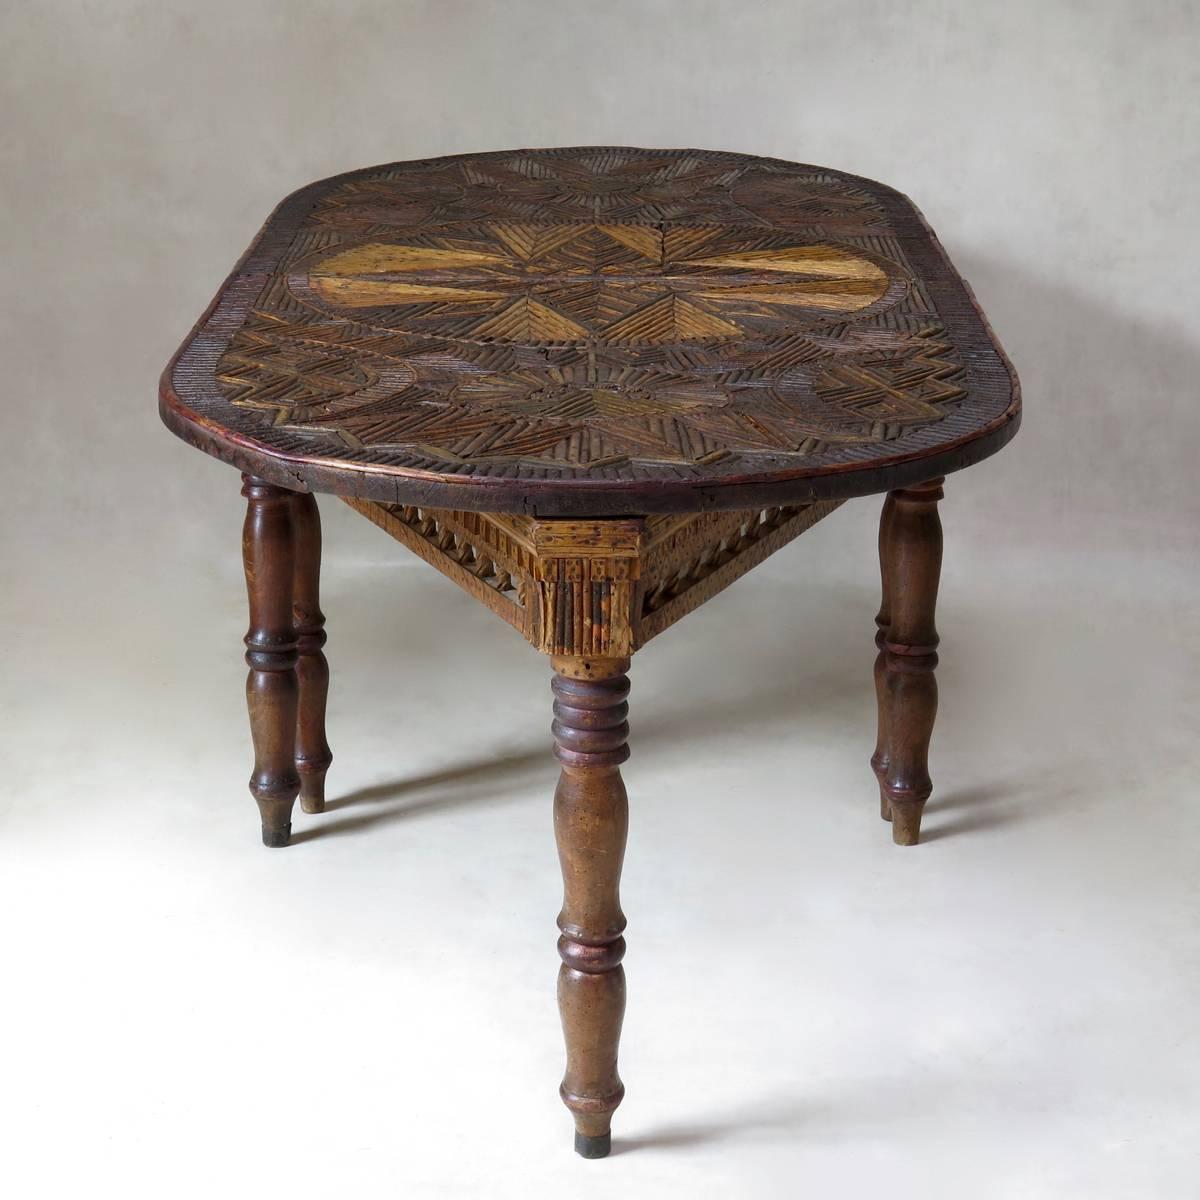 Rustic Oblong Twig-Top Table in Two Parts, France, 19th Century